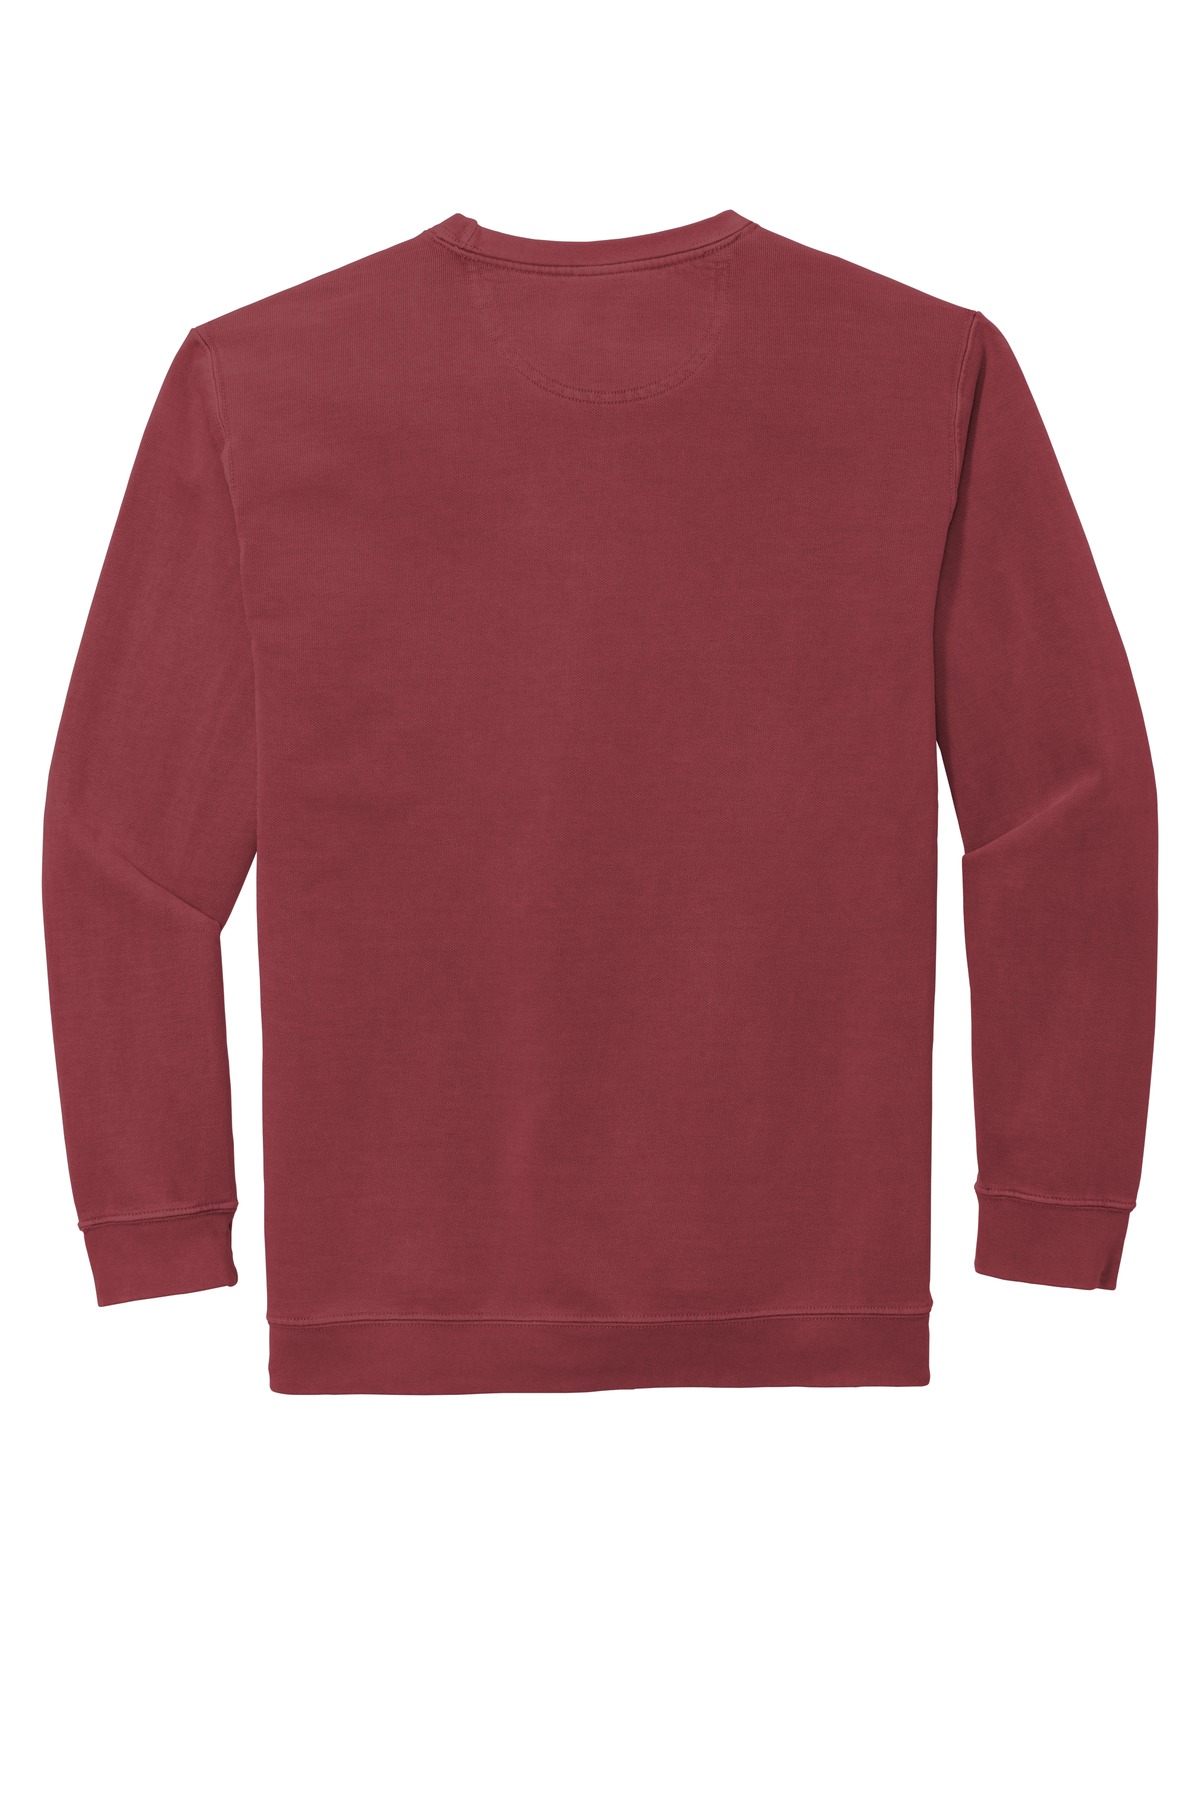 Comfort Colors 1566 Crewneck Sweater with Custom Embroidery